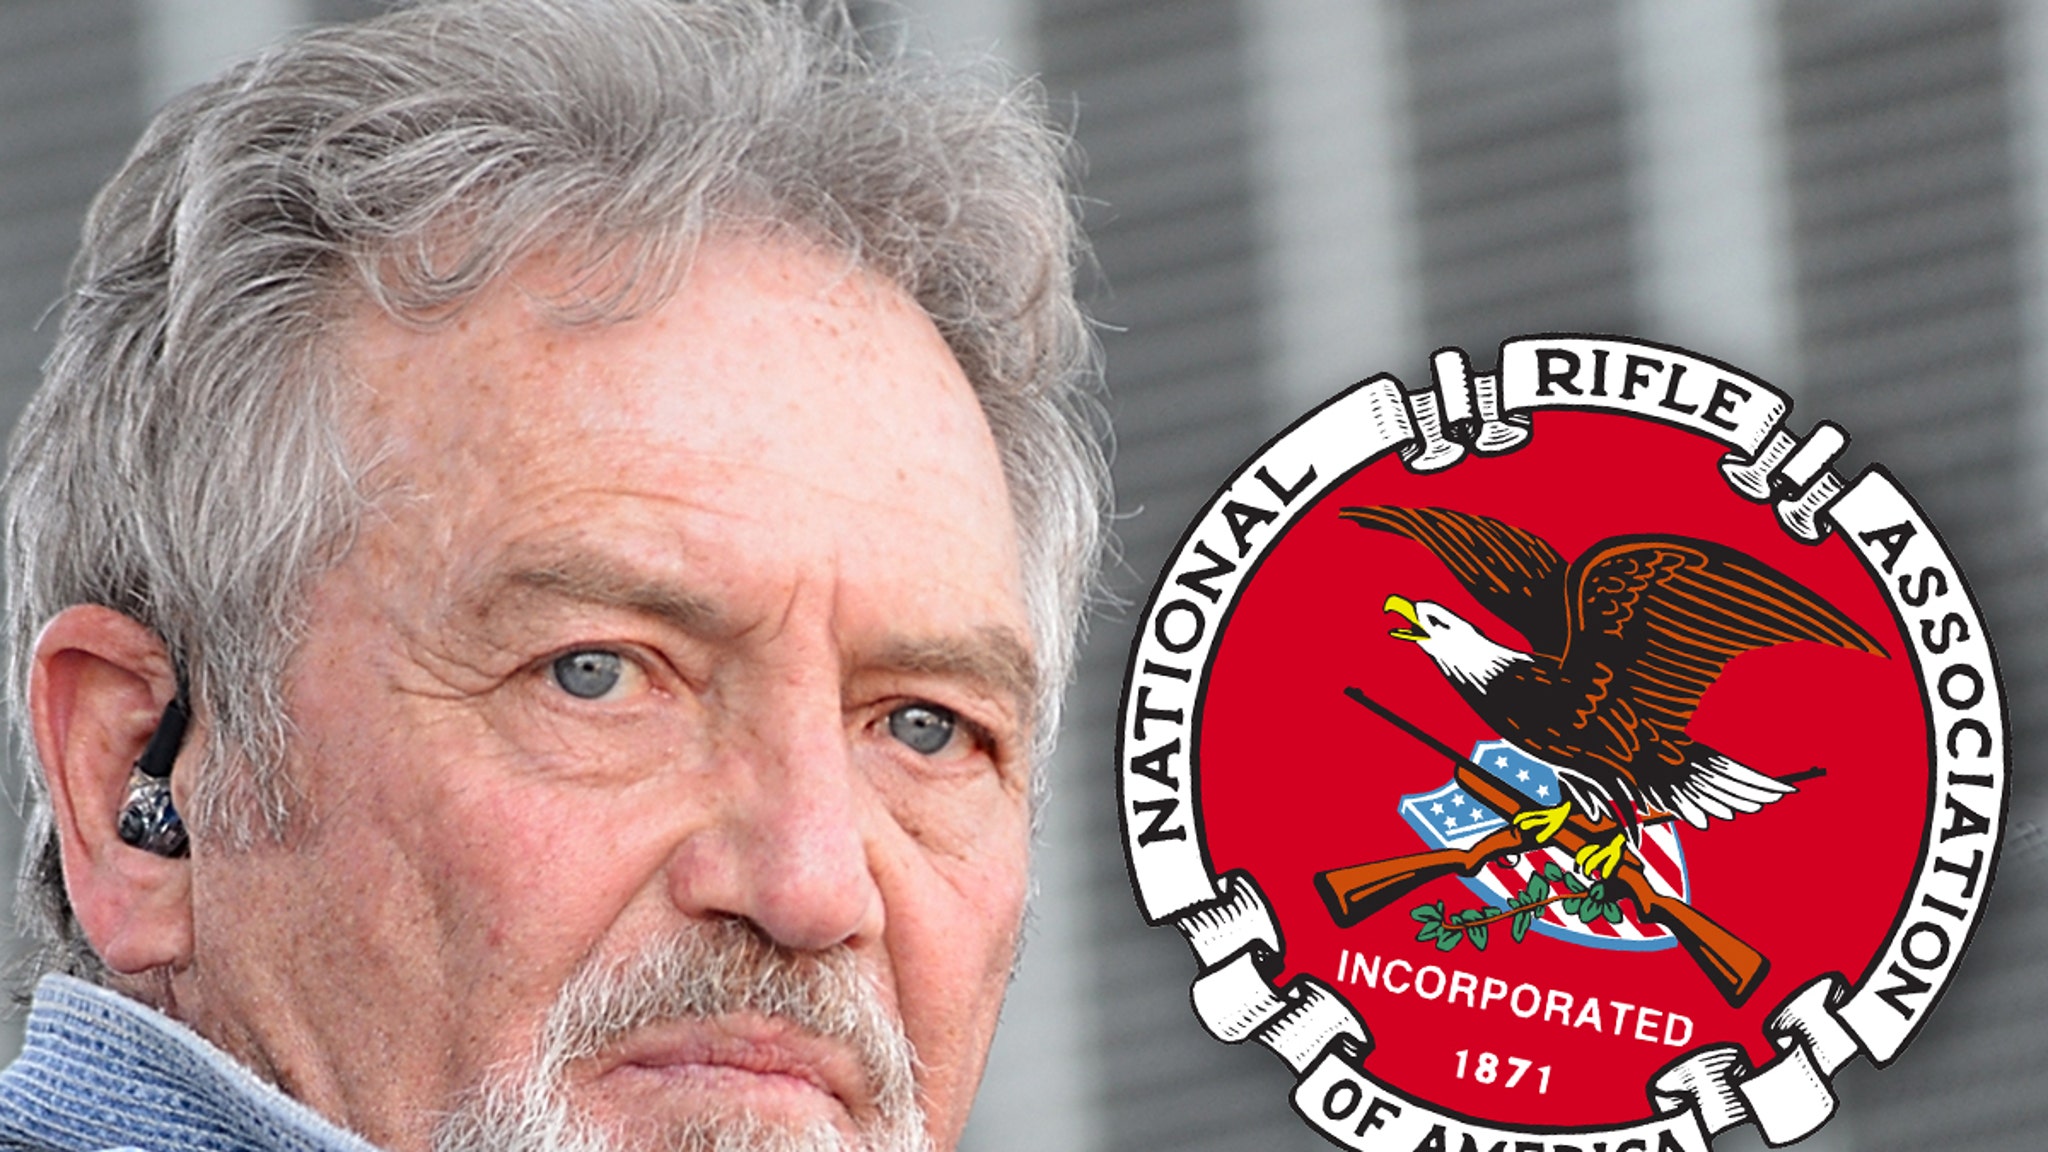 Larry Gatlin Cancels NRA Convention Performance, Calls for Background Checks